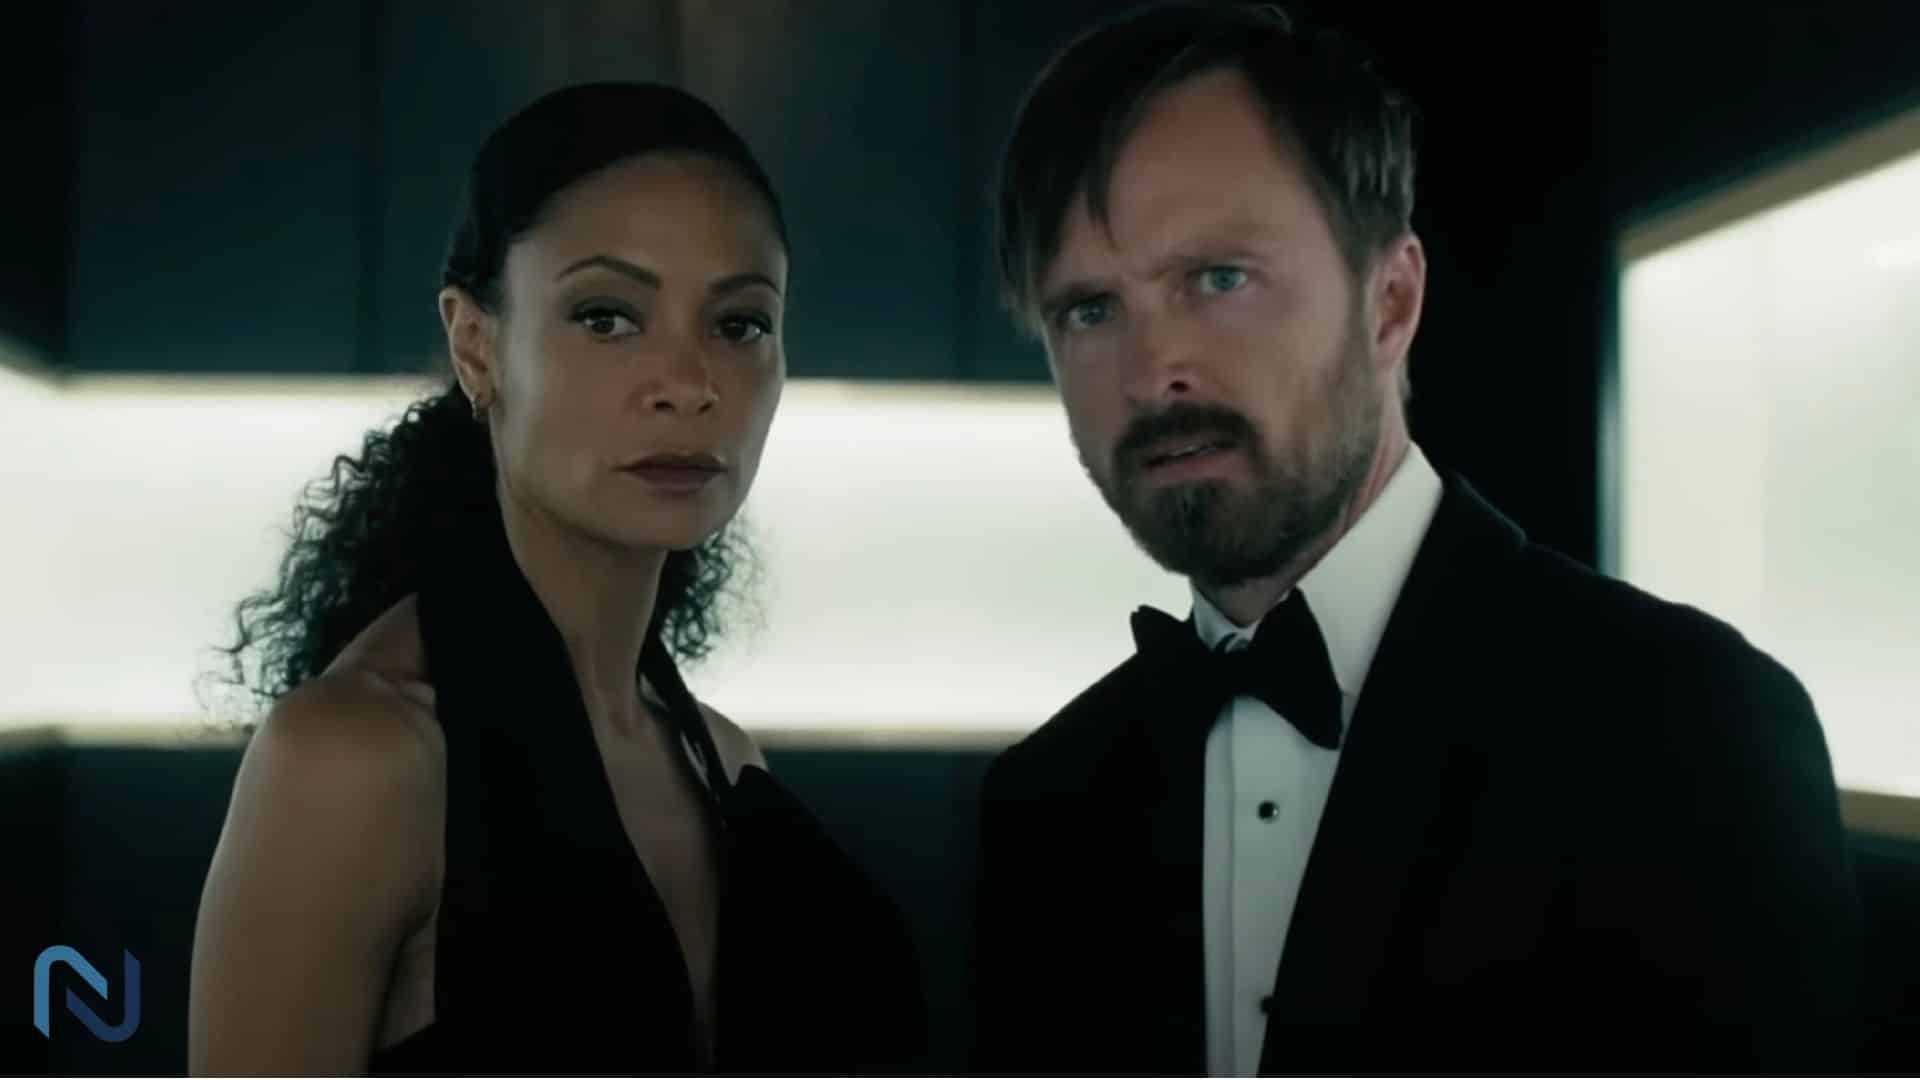 'Westworld Season 4' Review: Season 4 Gets Lost Within the Maze It Creates